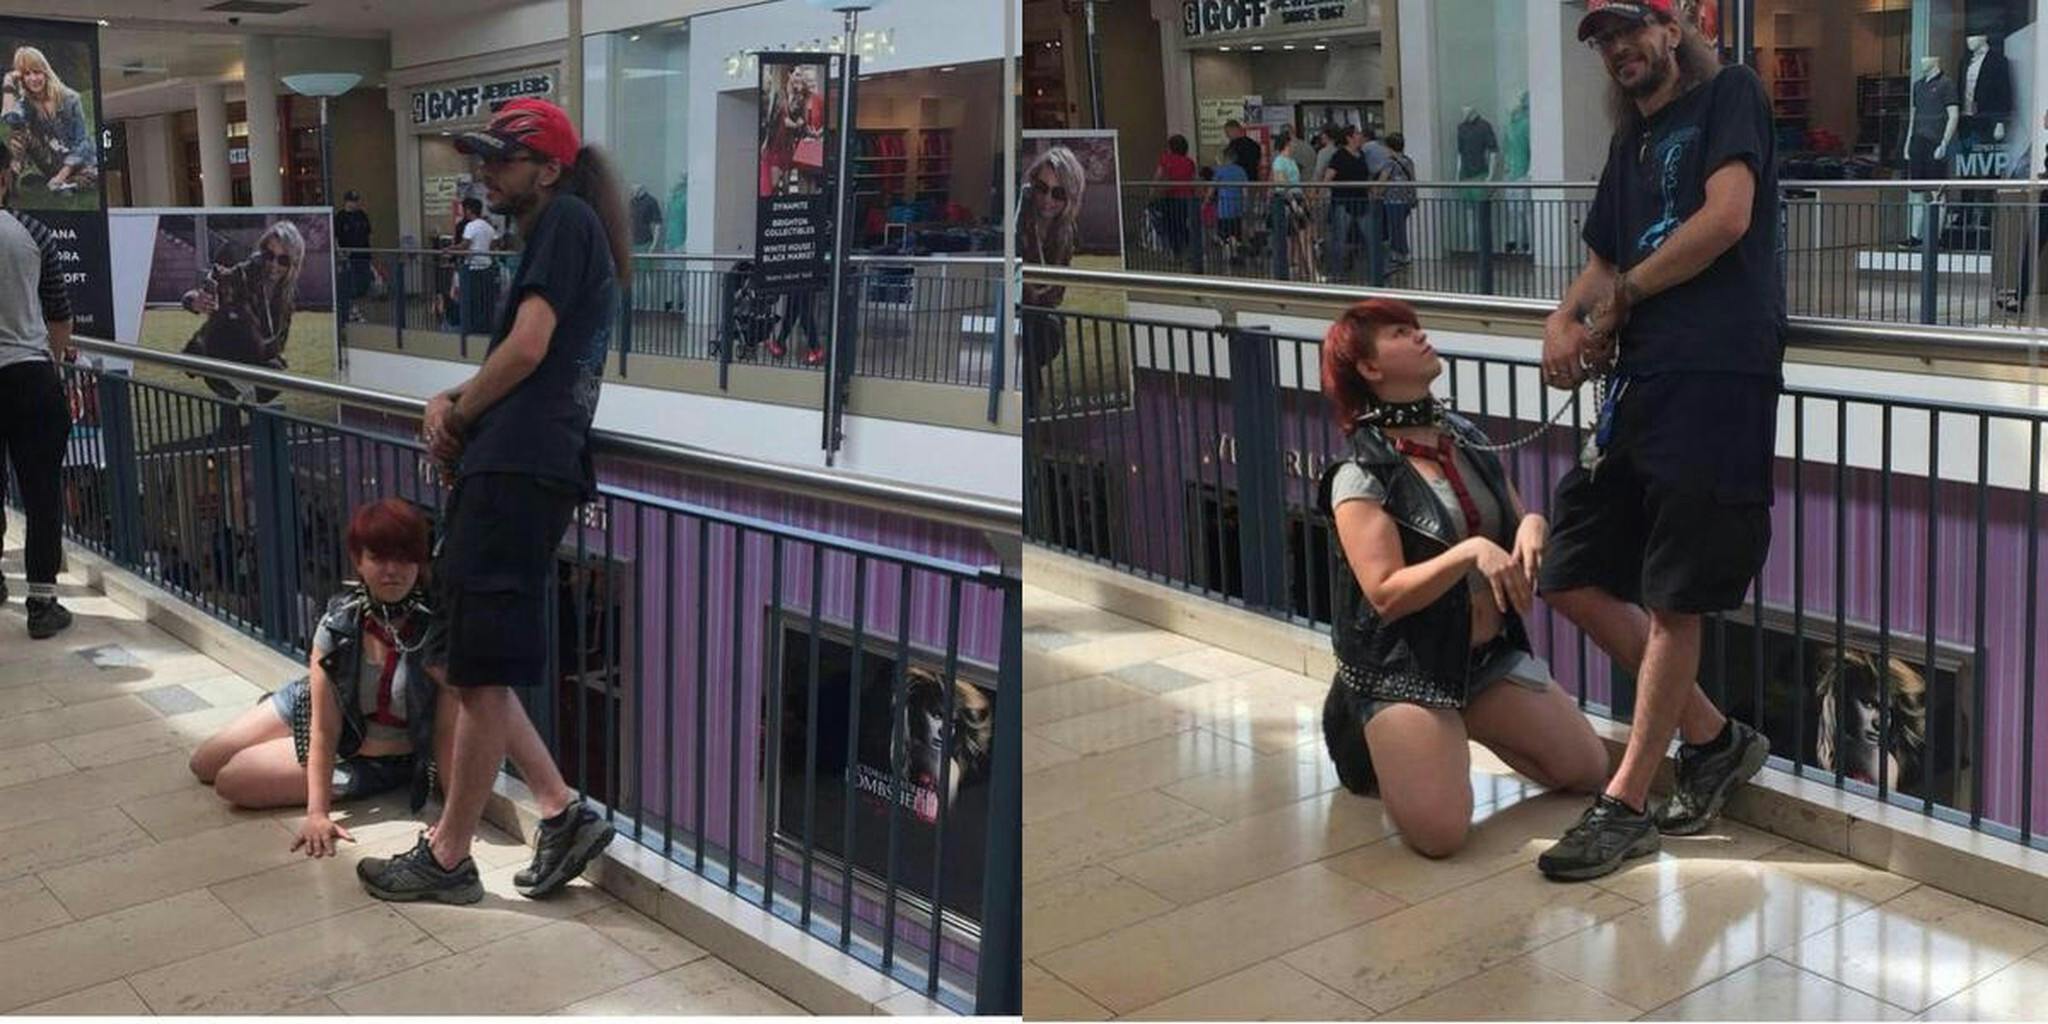 People Are Freaking Out Over This Photo Of A Woman Being Walked Around On A Leash